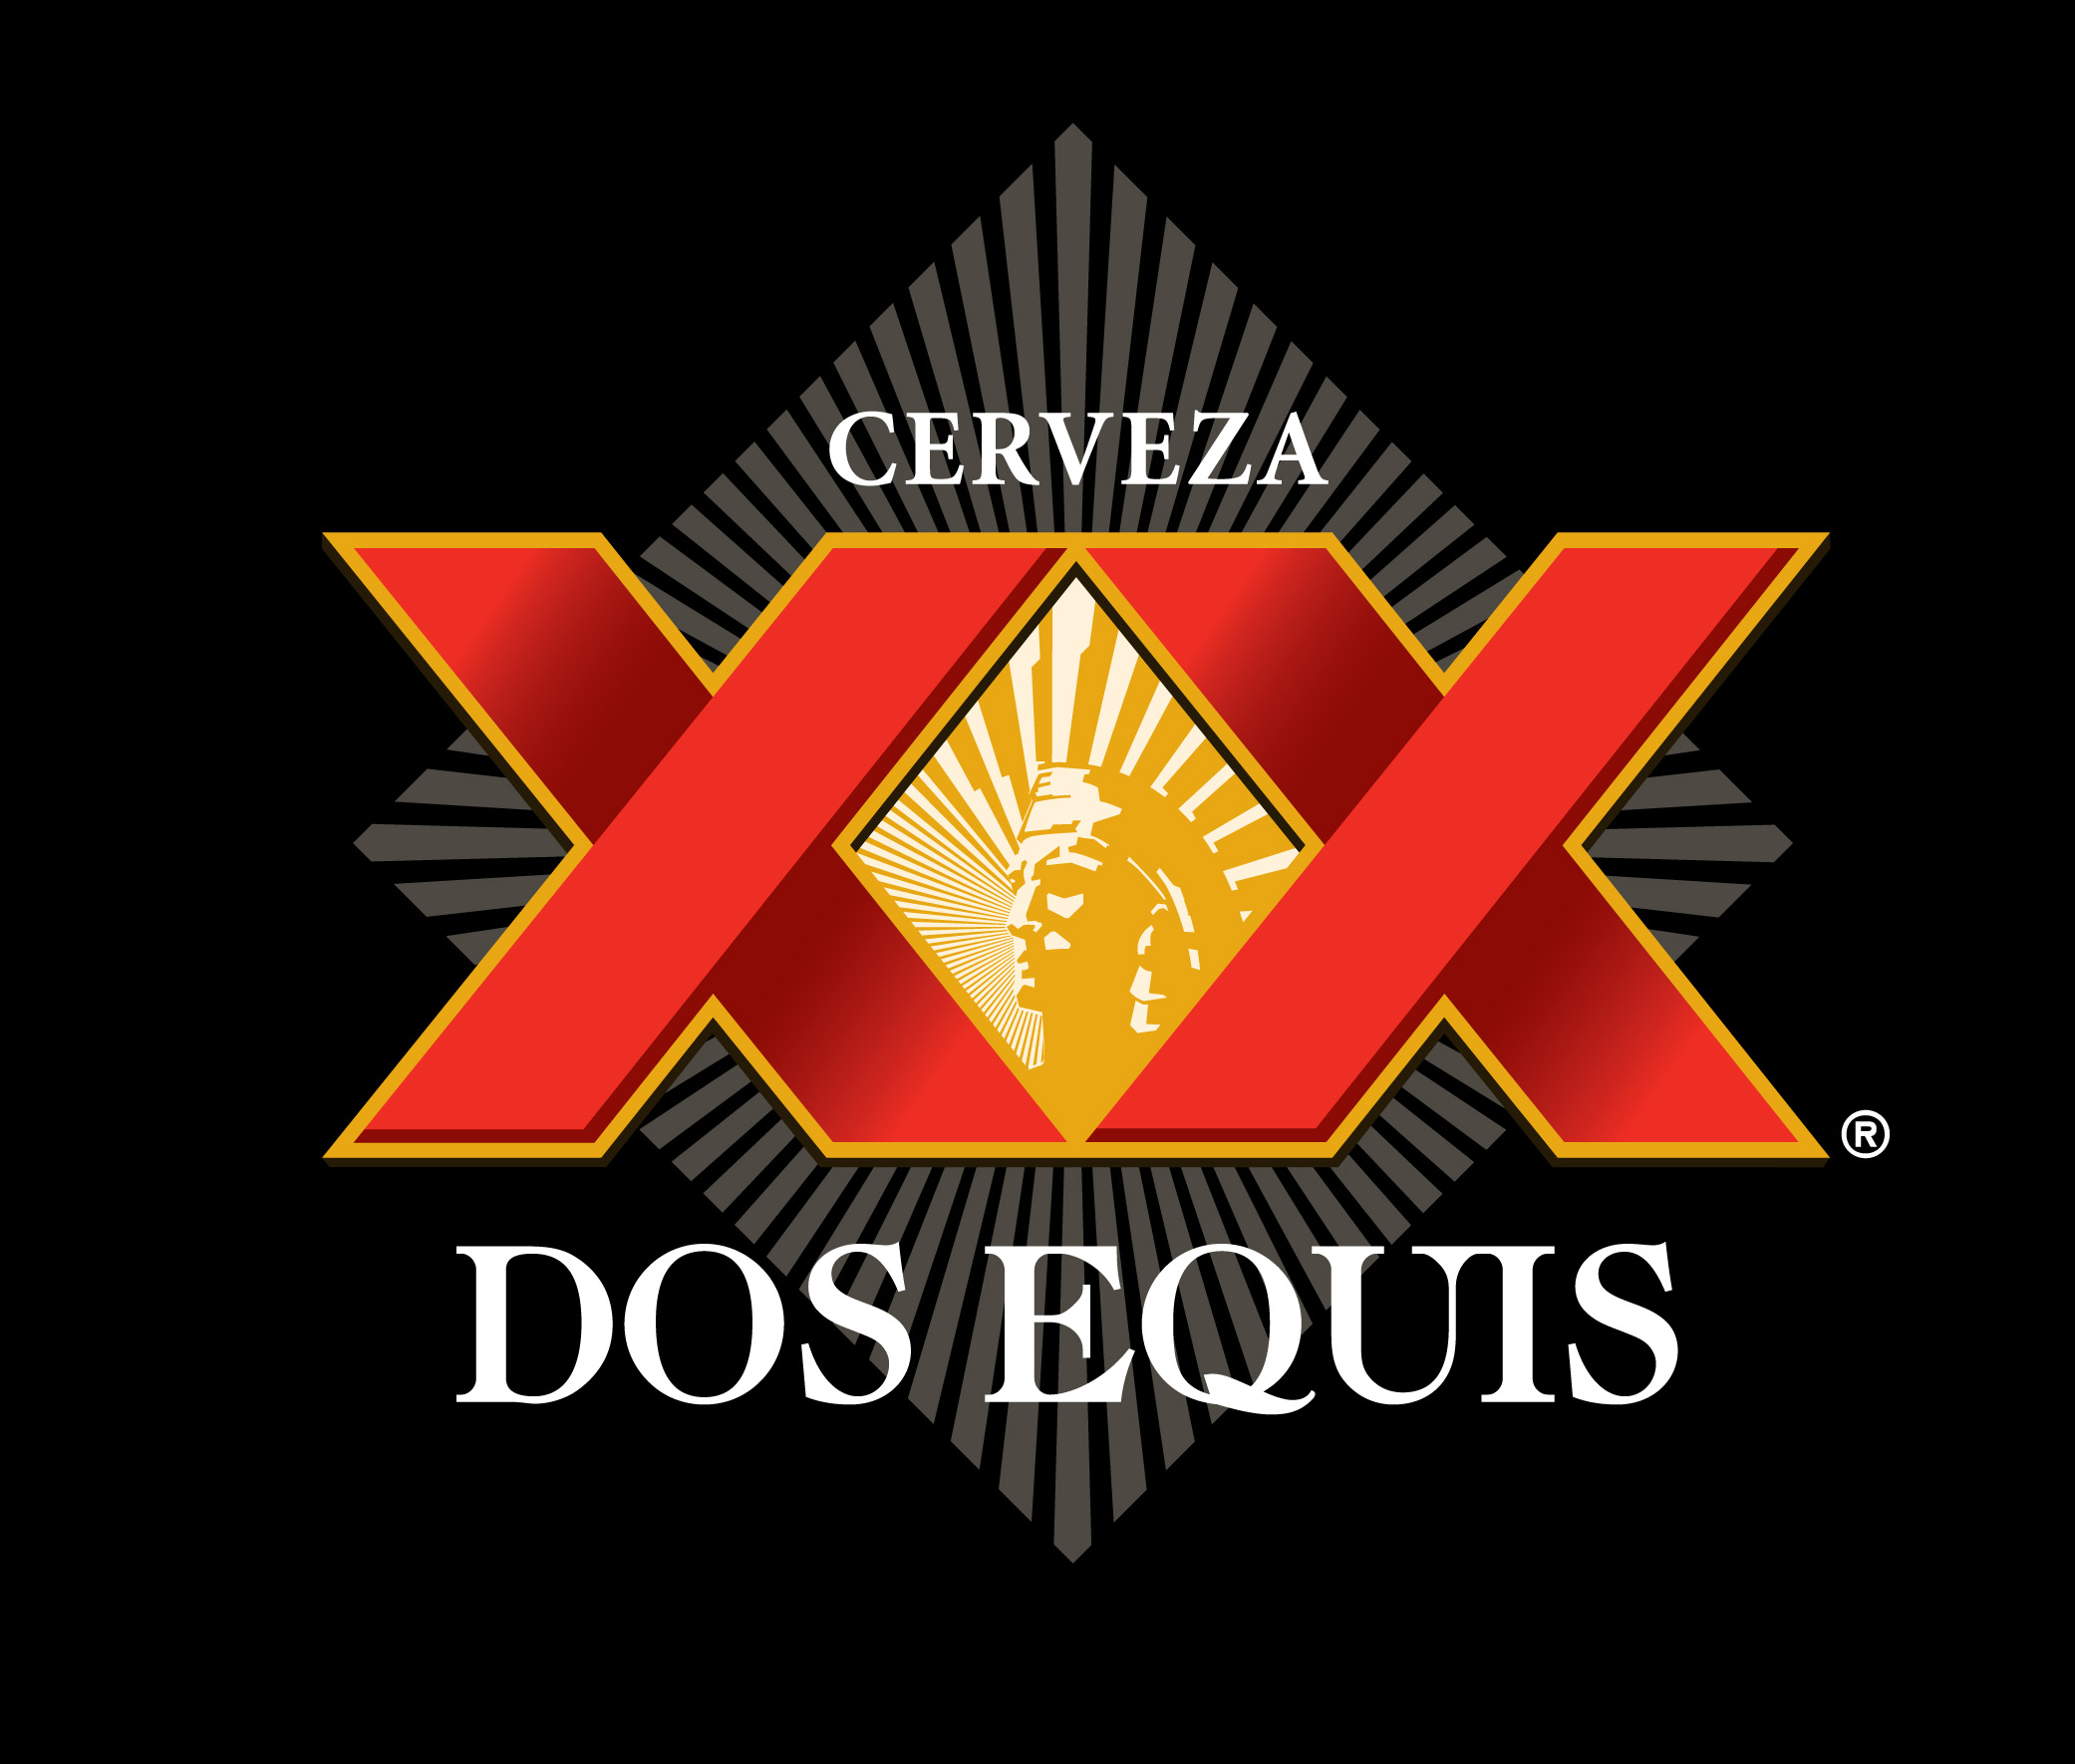 dos-equis-marks-the-spot-this-winter-massachusetts-beverage-business